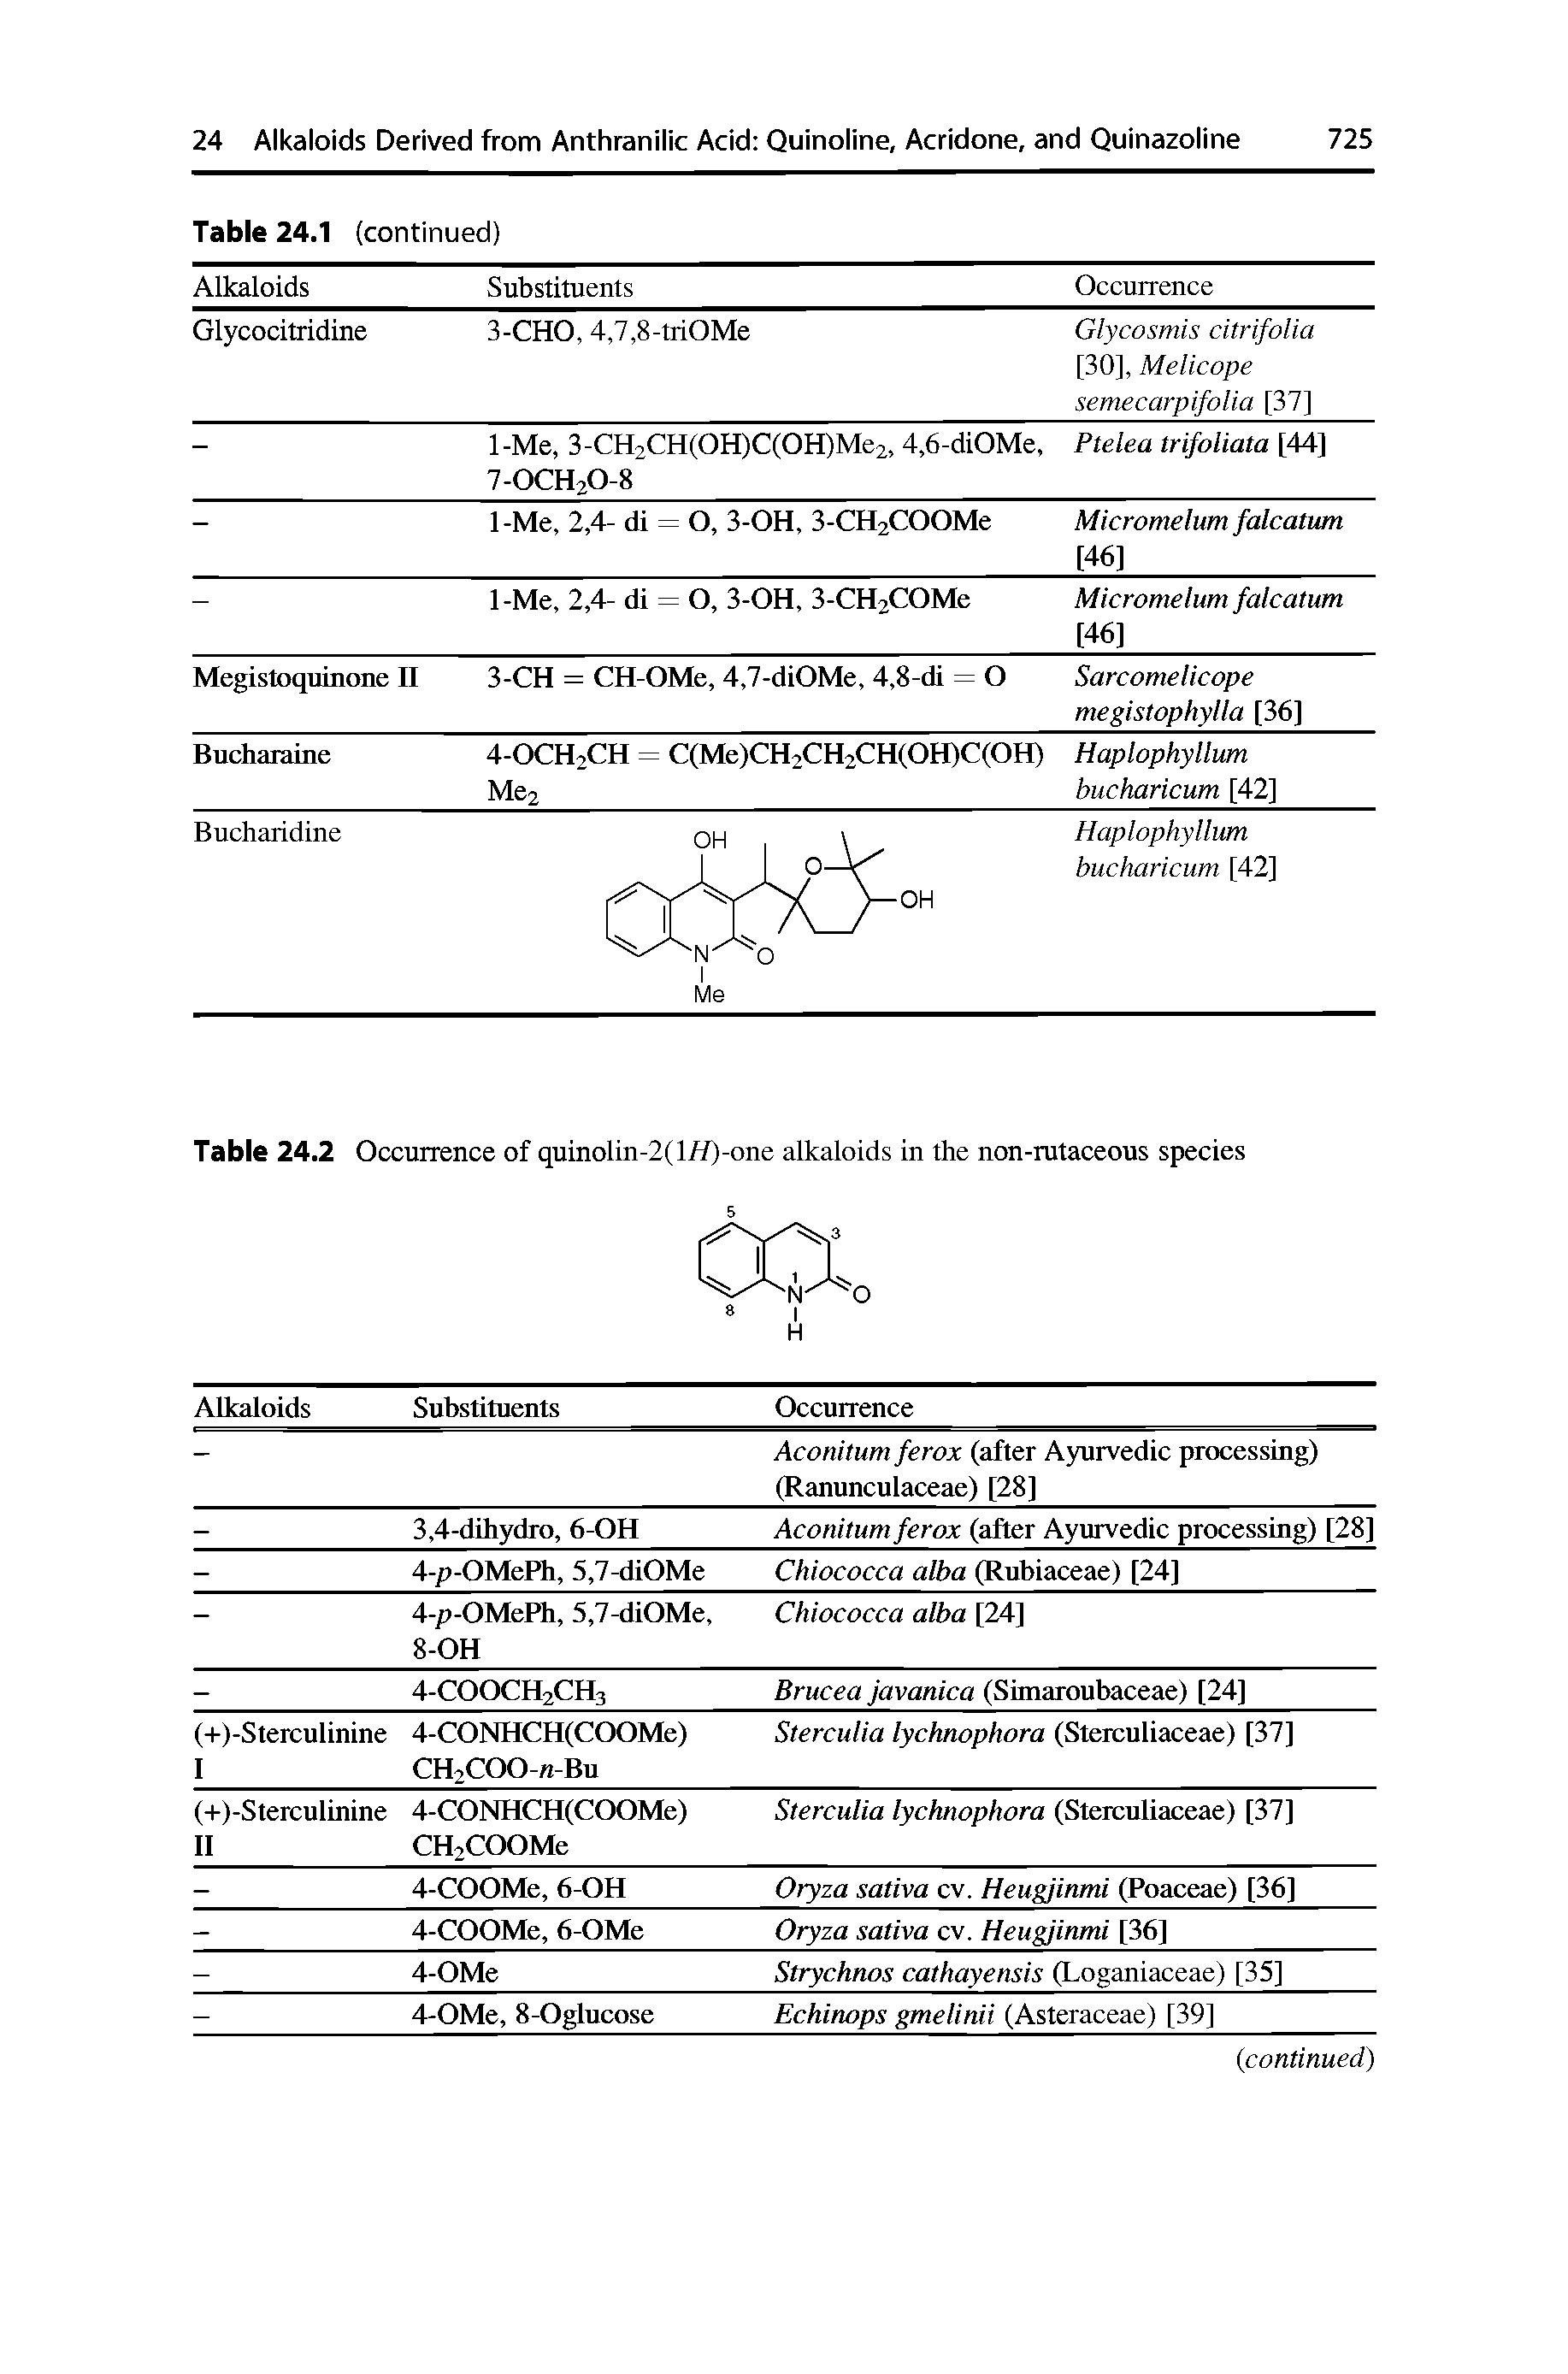 Table 24.2 Occurrence of quinolin-2(l/f)-one alkaloids in the non-rutaceous species...